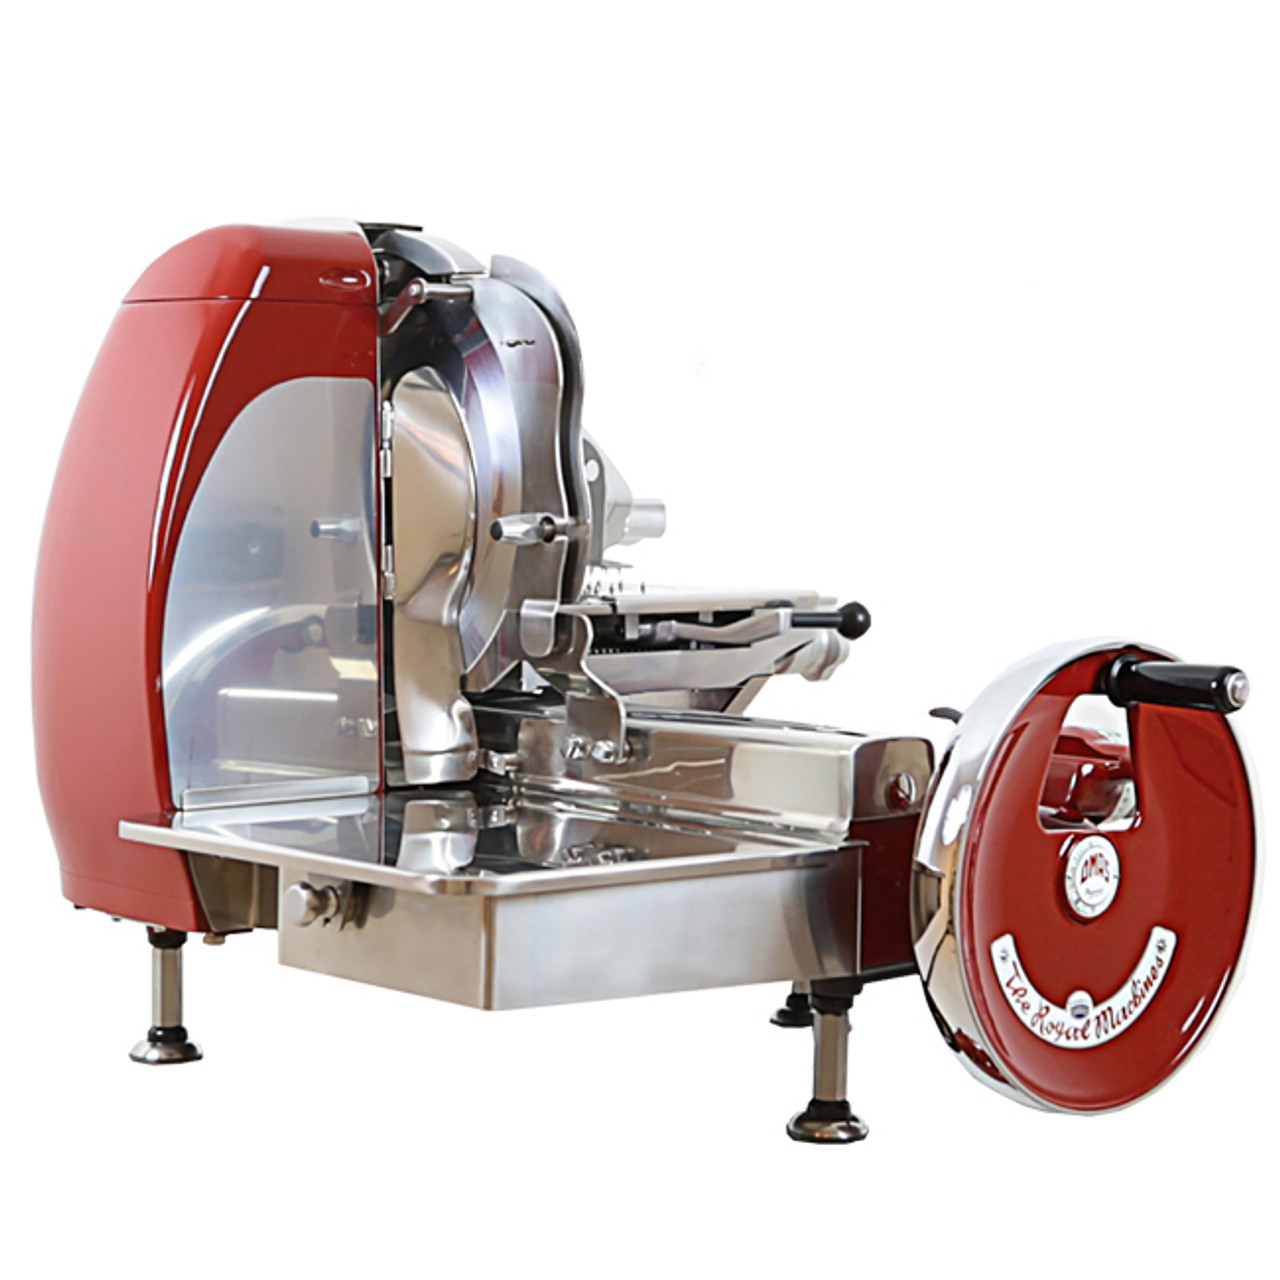 https://cdn11.bigcommerce.com/s-3n1nnt5qyw/images/stencil/1280x1280/products/12834/14925/omcan-14-5-diameter-blade-manual-volano-slicer-with-standard-flywheel-model-46088-1__46486.1629762911.jpg?c=1